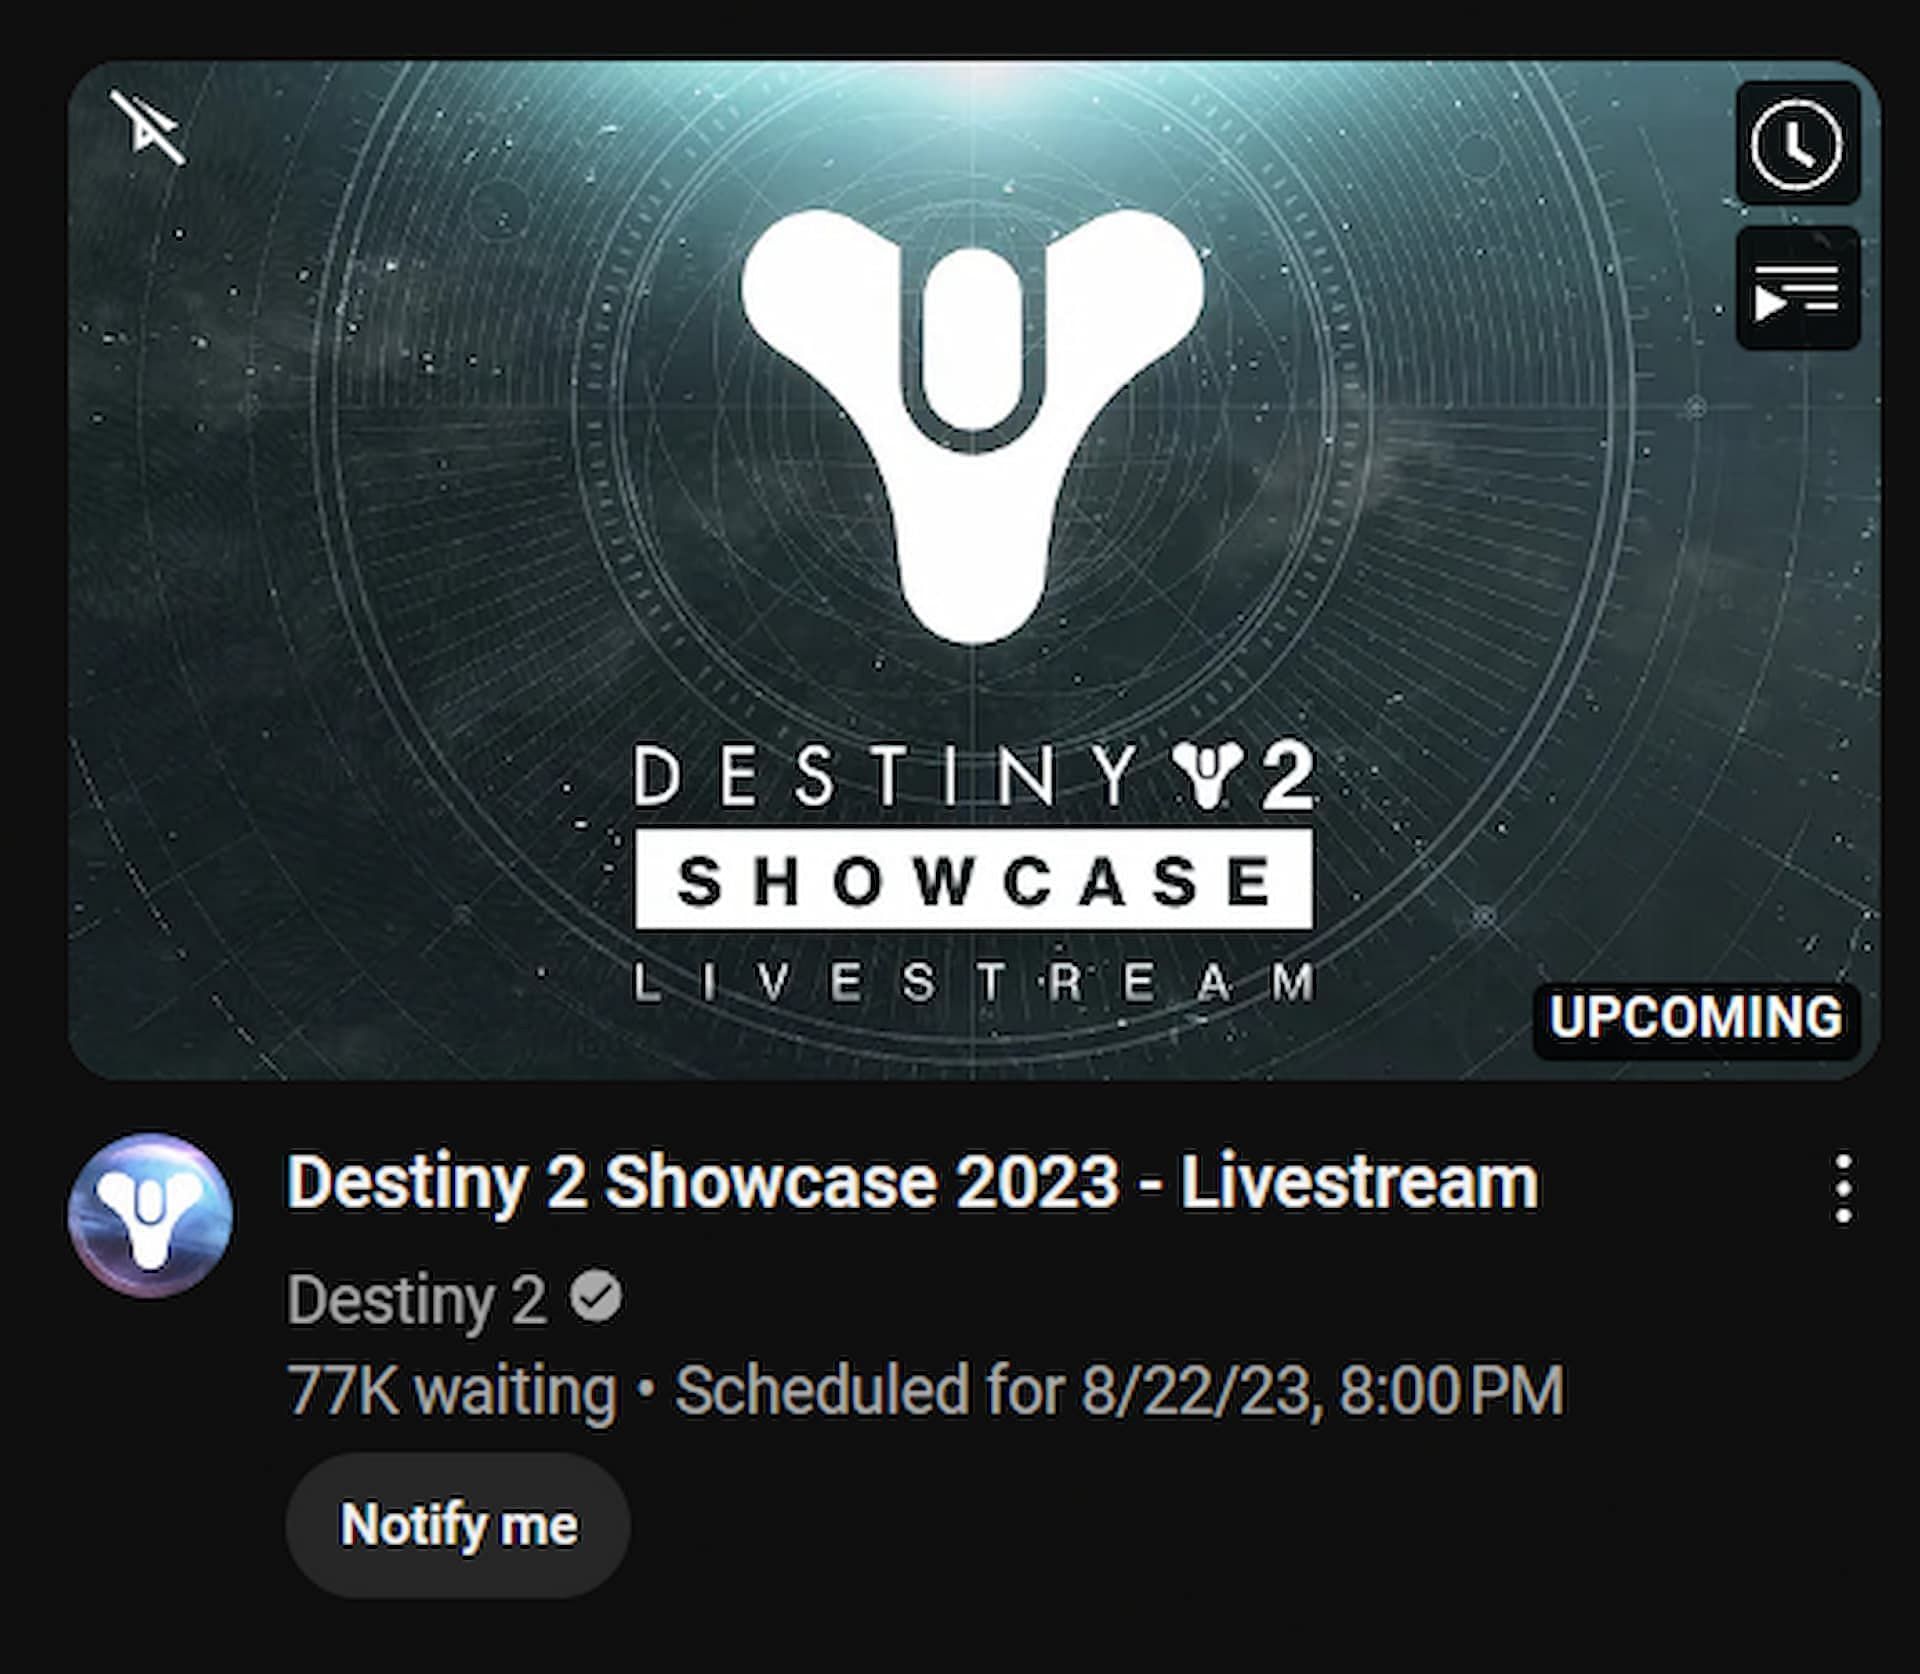 76,000 players have been waiting to catch the showcase (Screenshot by Sportskeeda)